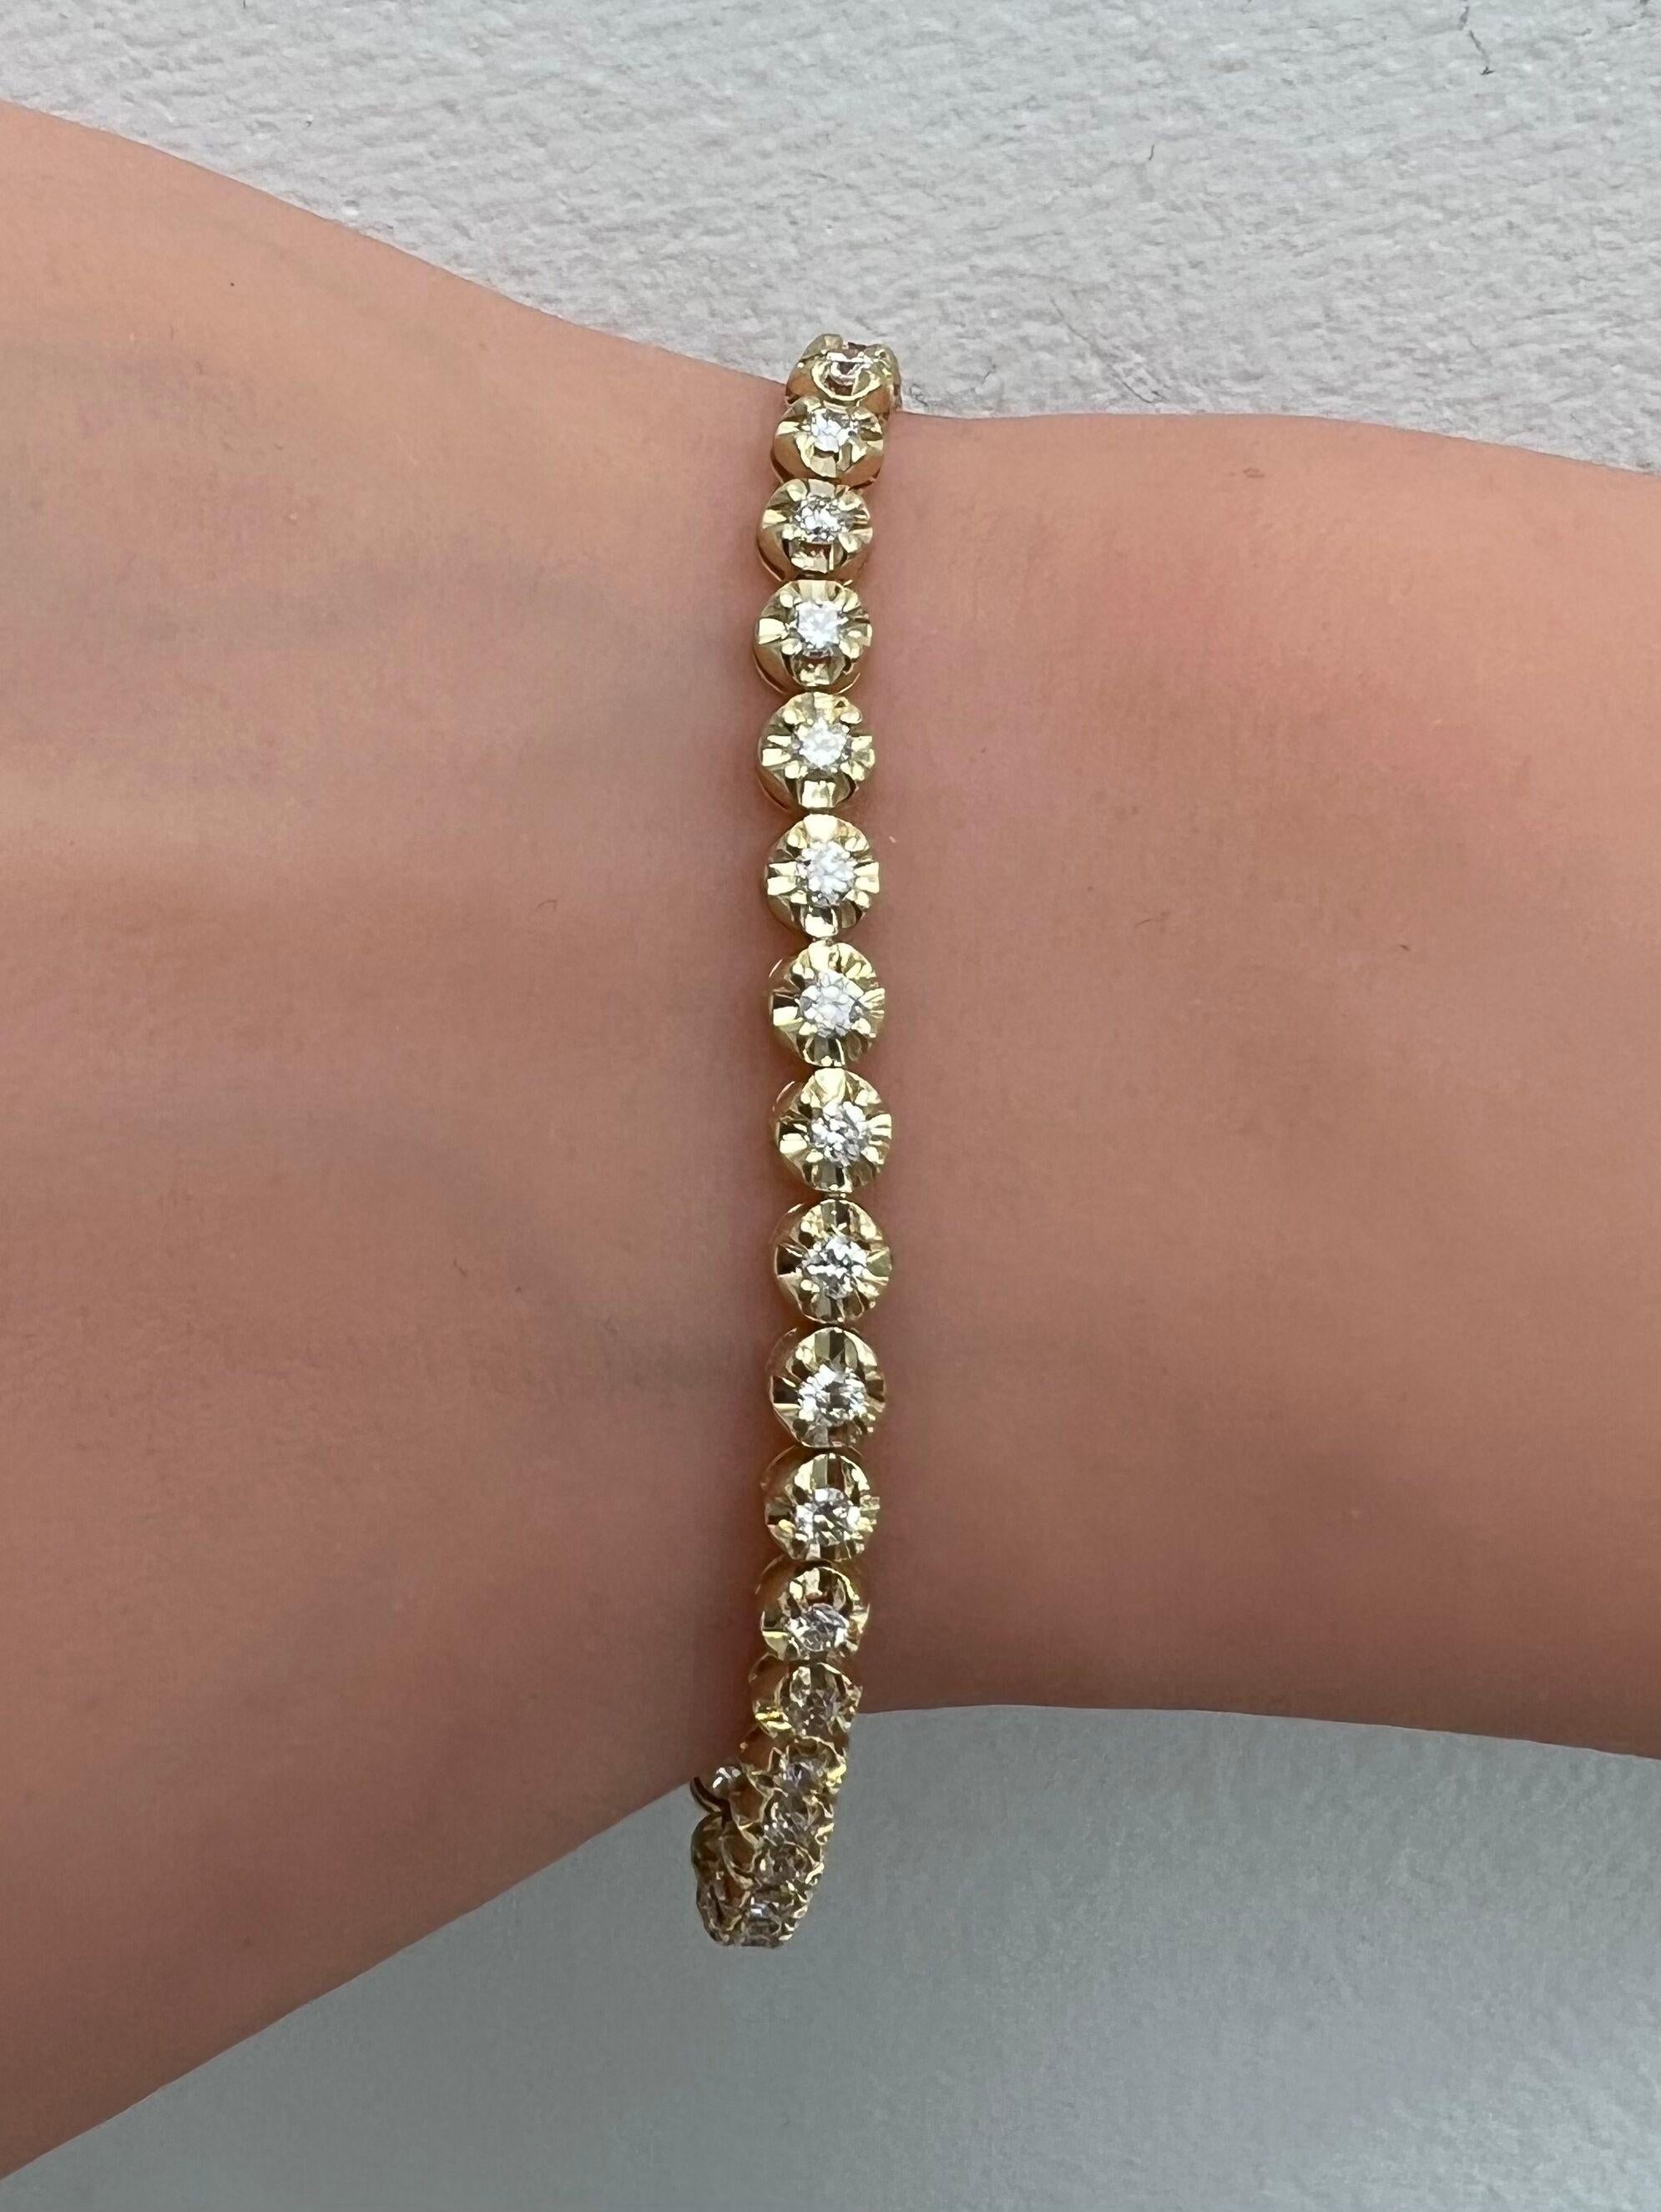 Diamond Tennis Bracelet with Innovative Illusion Setting
This 2.00 Carats diamond bracelet has a look of a 10.00 carats, due to the new and innovative illusion setting.
Natural Full Brilliant Cut Diamonds
14k Yellow Gold
Number of Diamonds: 39
Total